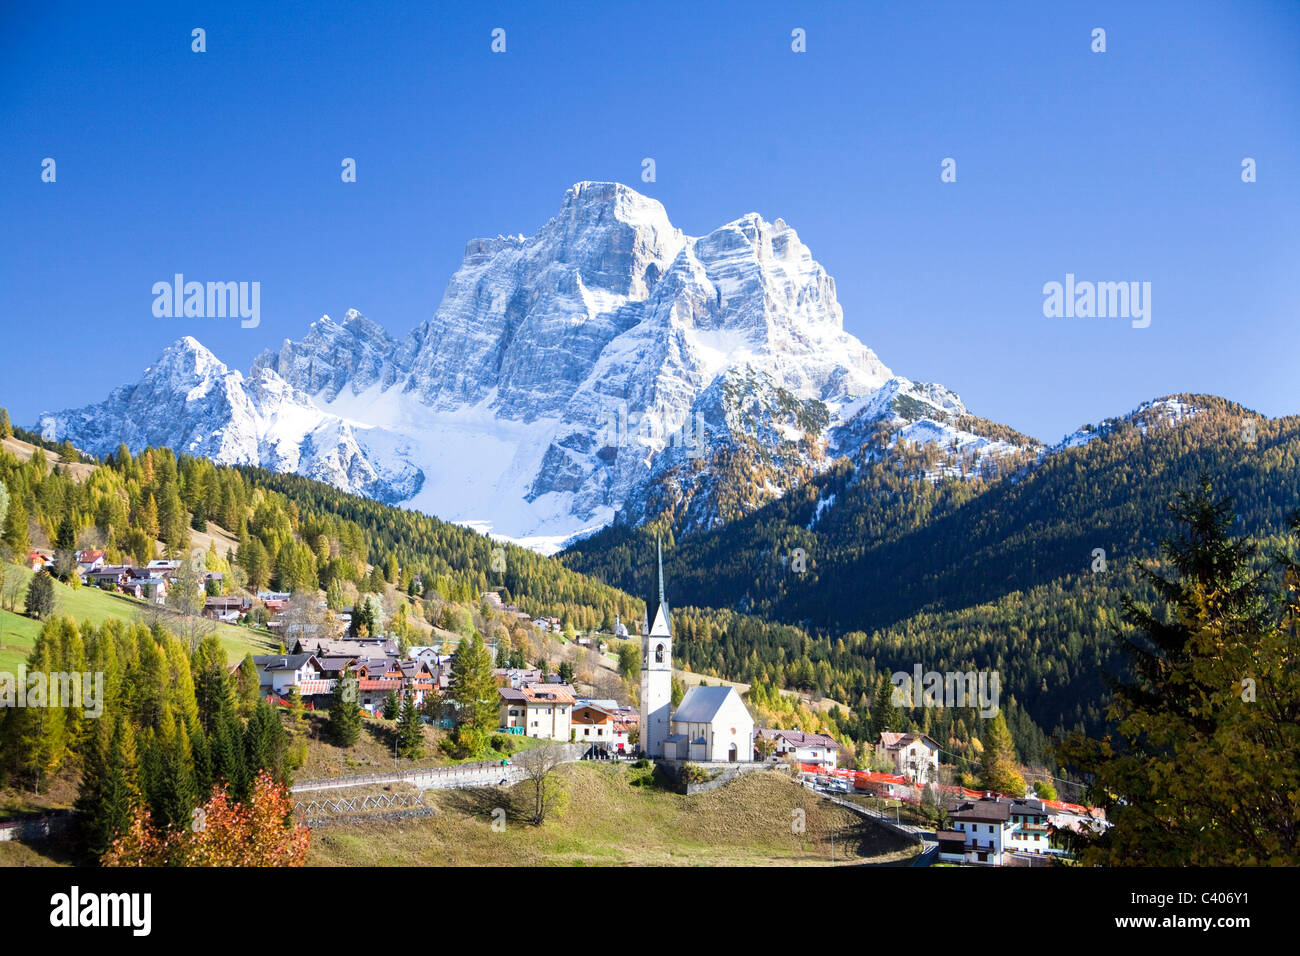 Italy, Europe, Dolomites, Alps, Selva di Cadore, Pelmo, mountains, wood, forest, autumn, UNESCO world cultural heritage Stock Photo